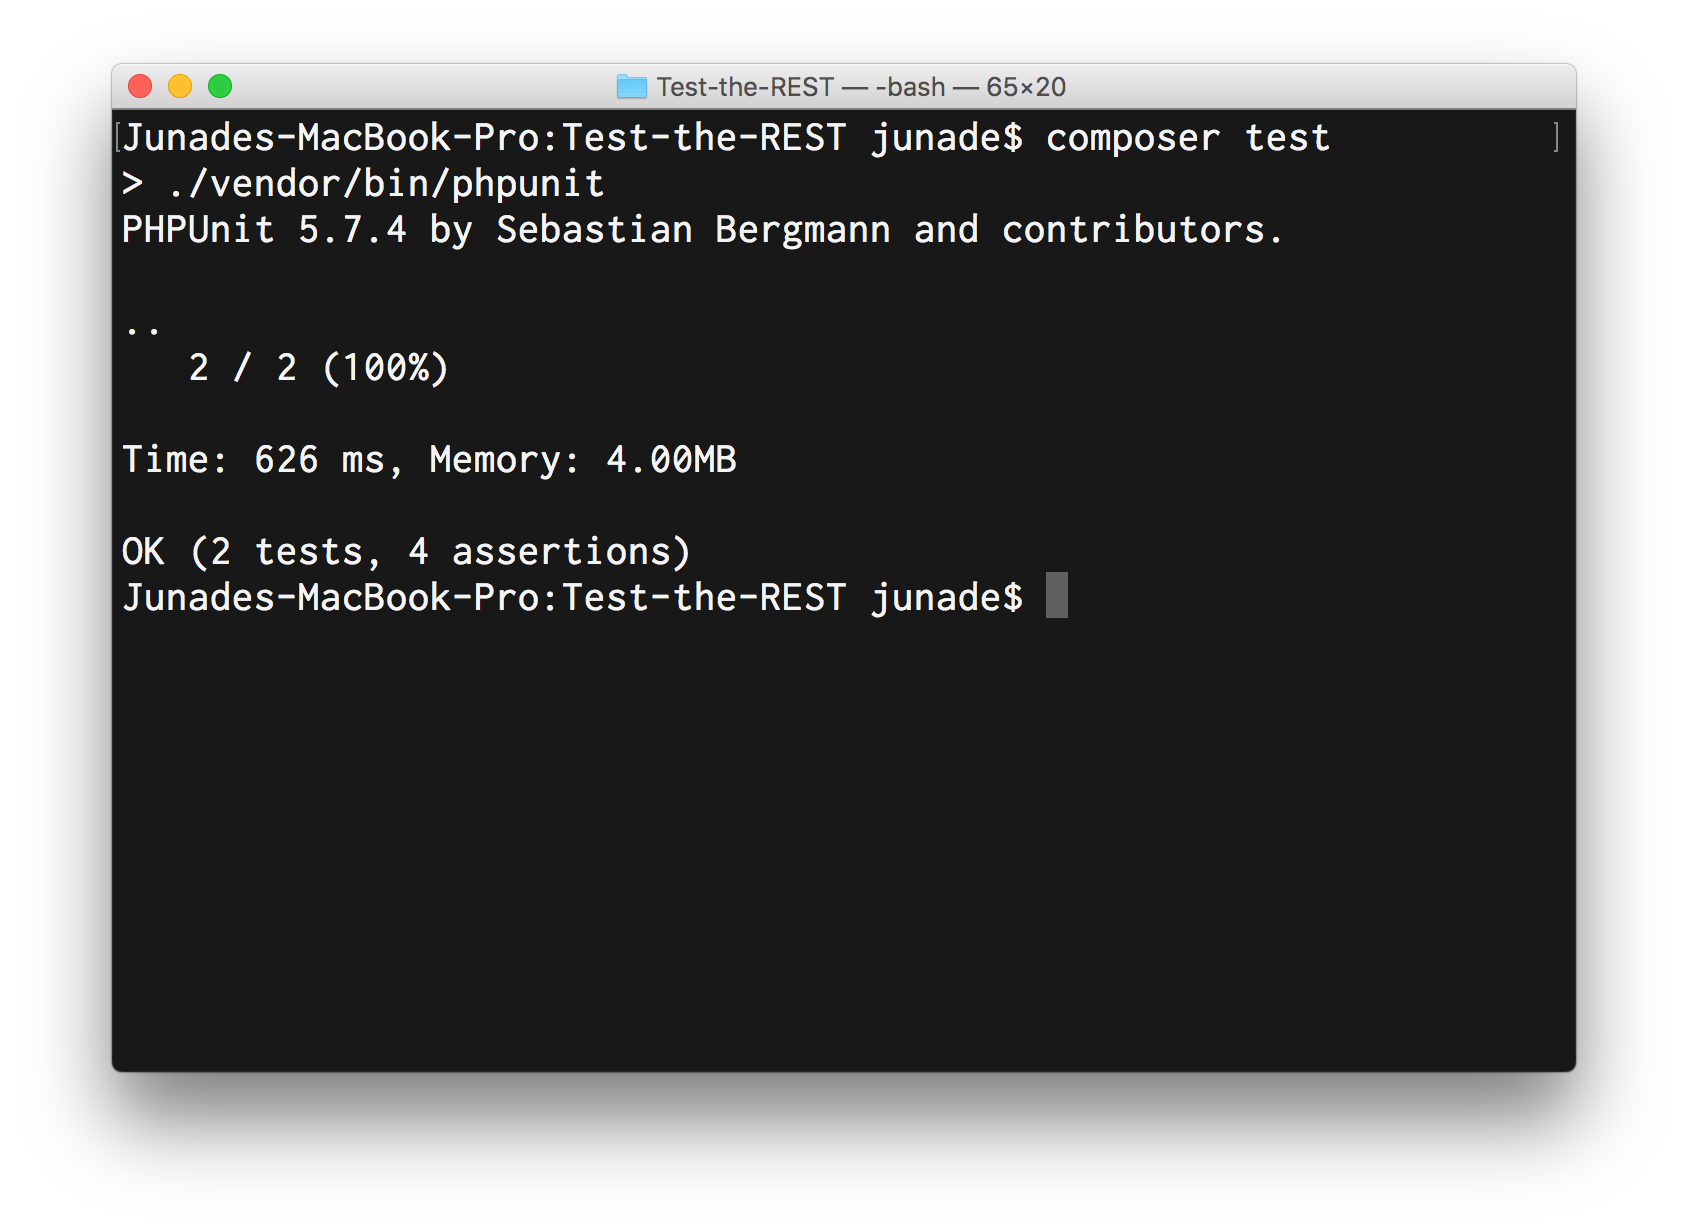 Running composer test, terminal indicating that 2 tests have been run with 4 assertions